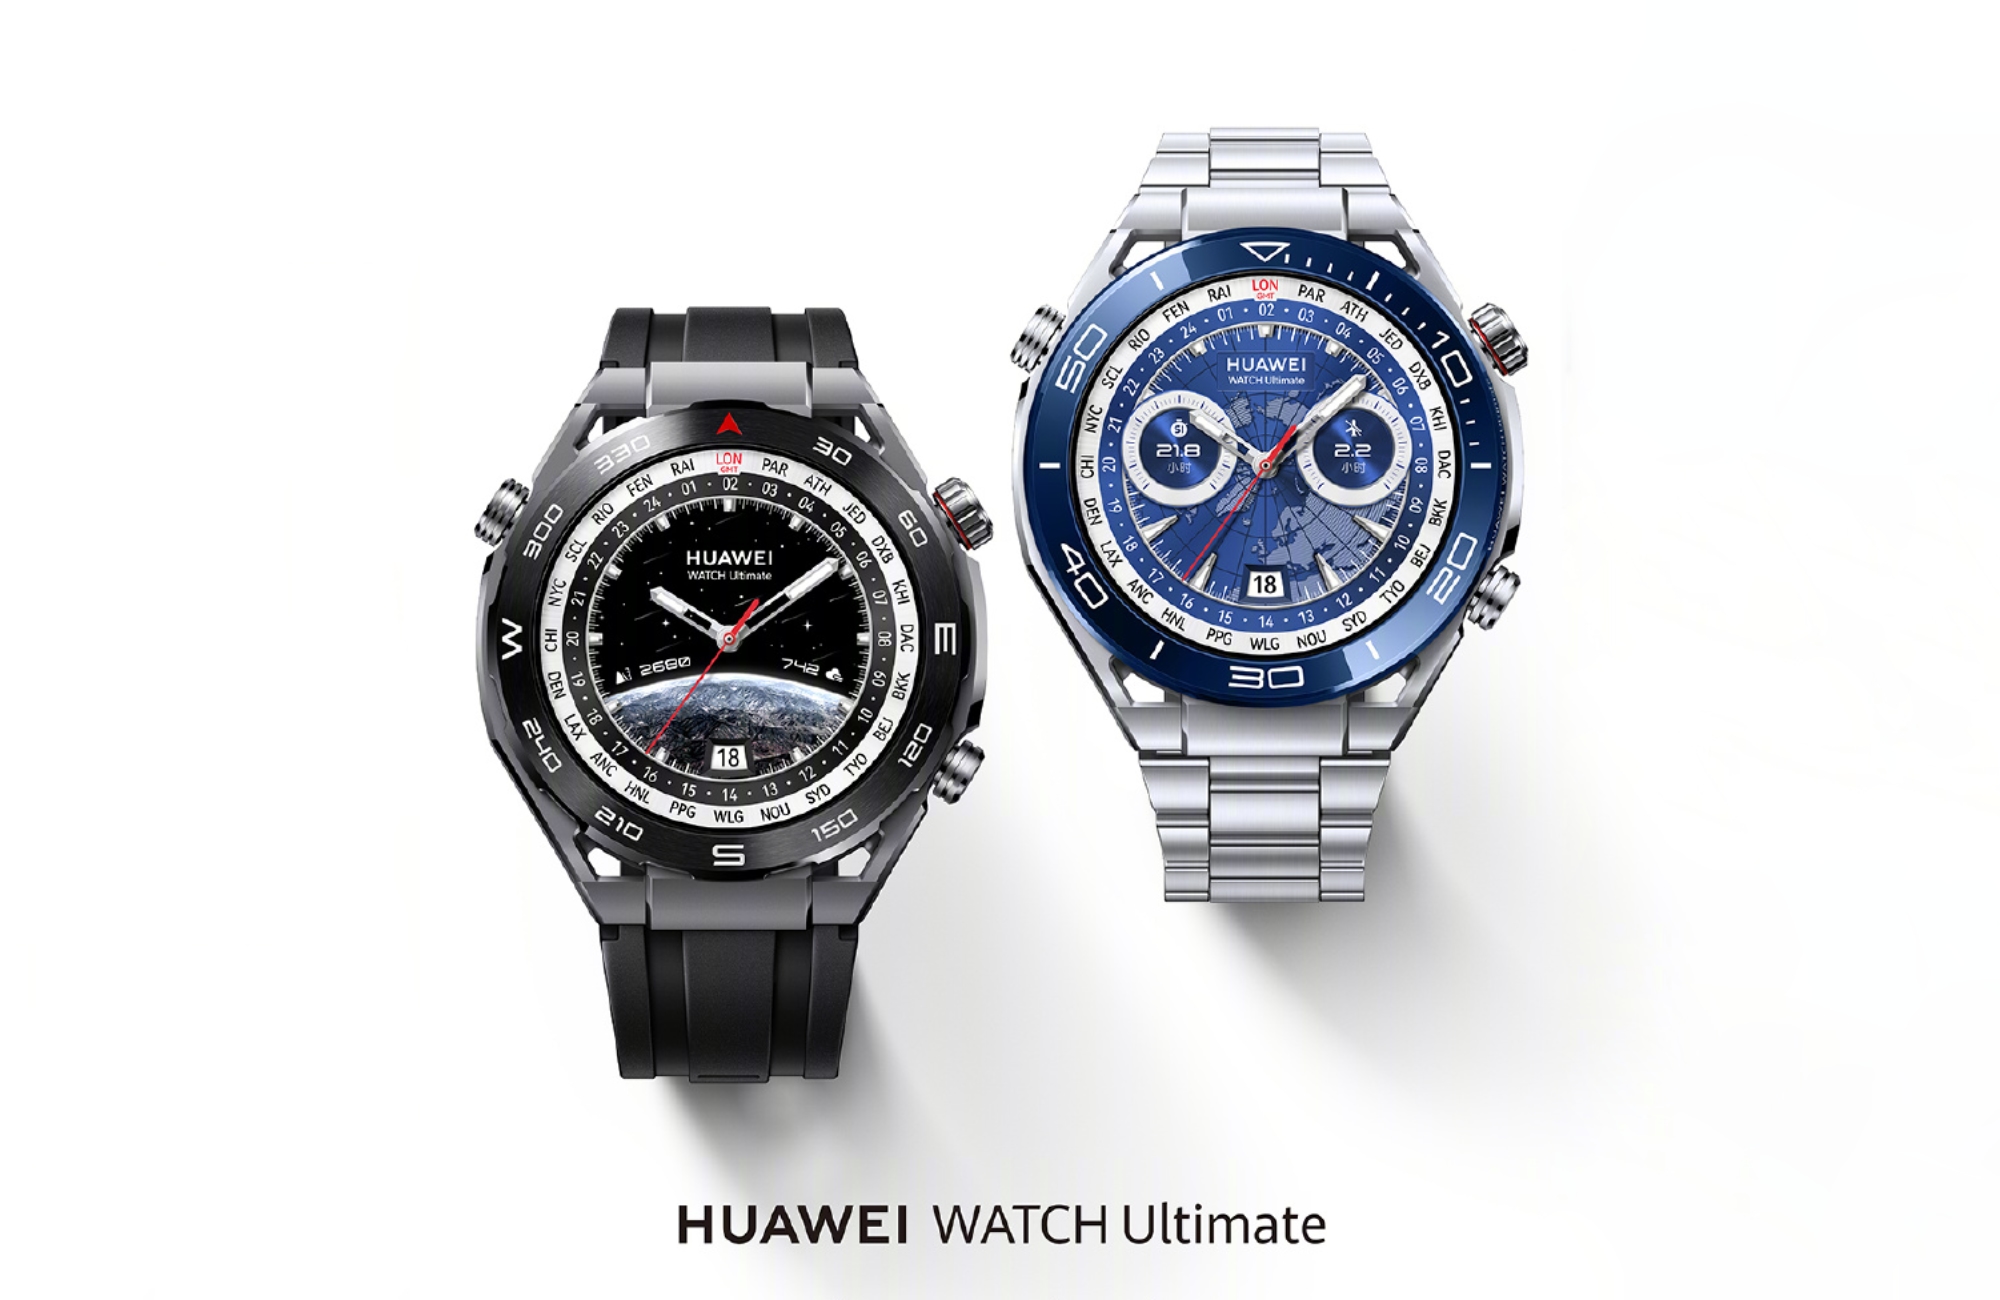 Apple Watch Ultra competitor: Huawei unveils Watch Ultimate smartwatch with diving function, LTPO AMOLED screen and up to 14 days battery life